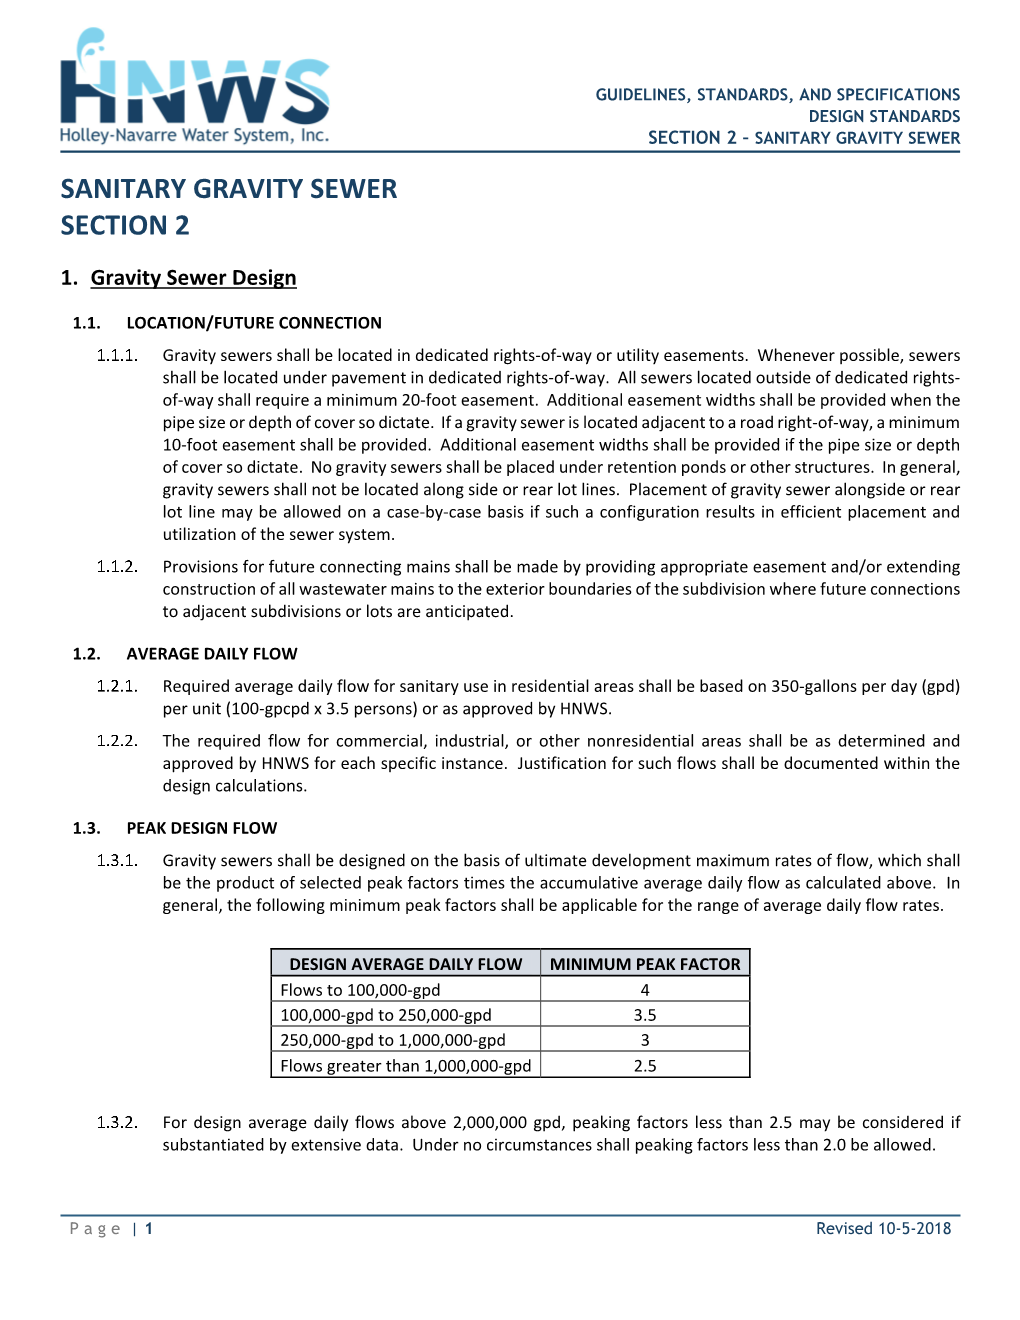 Sanitary Gravity Sewer Section 2